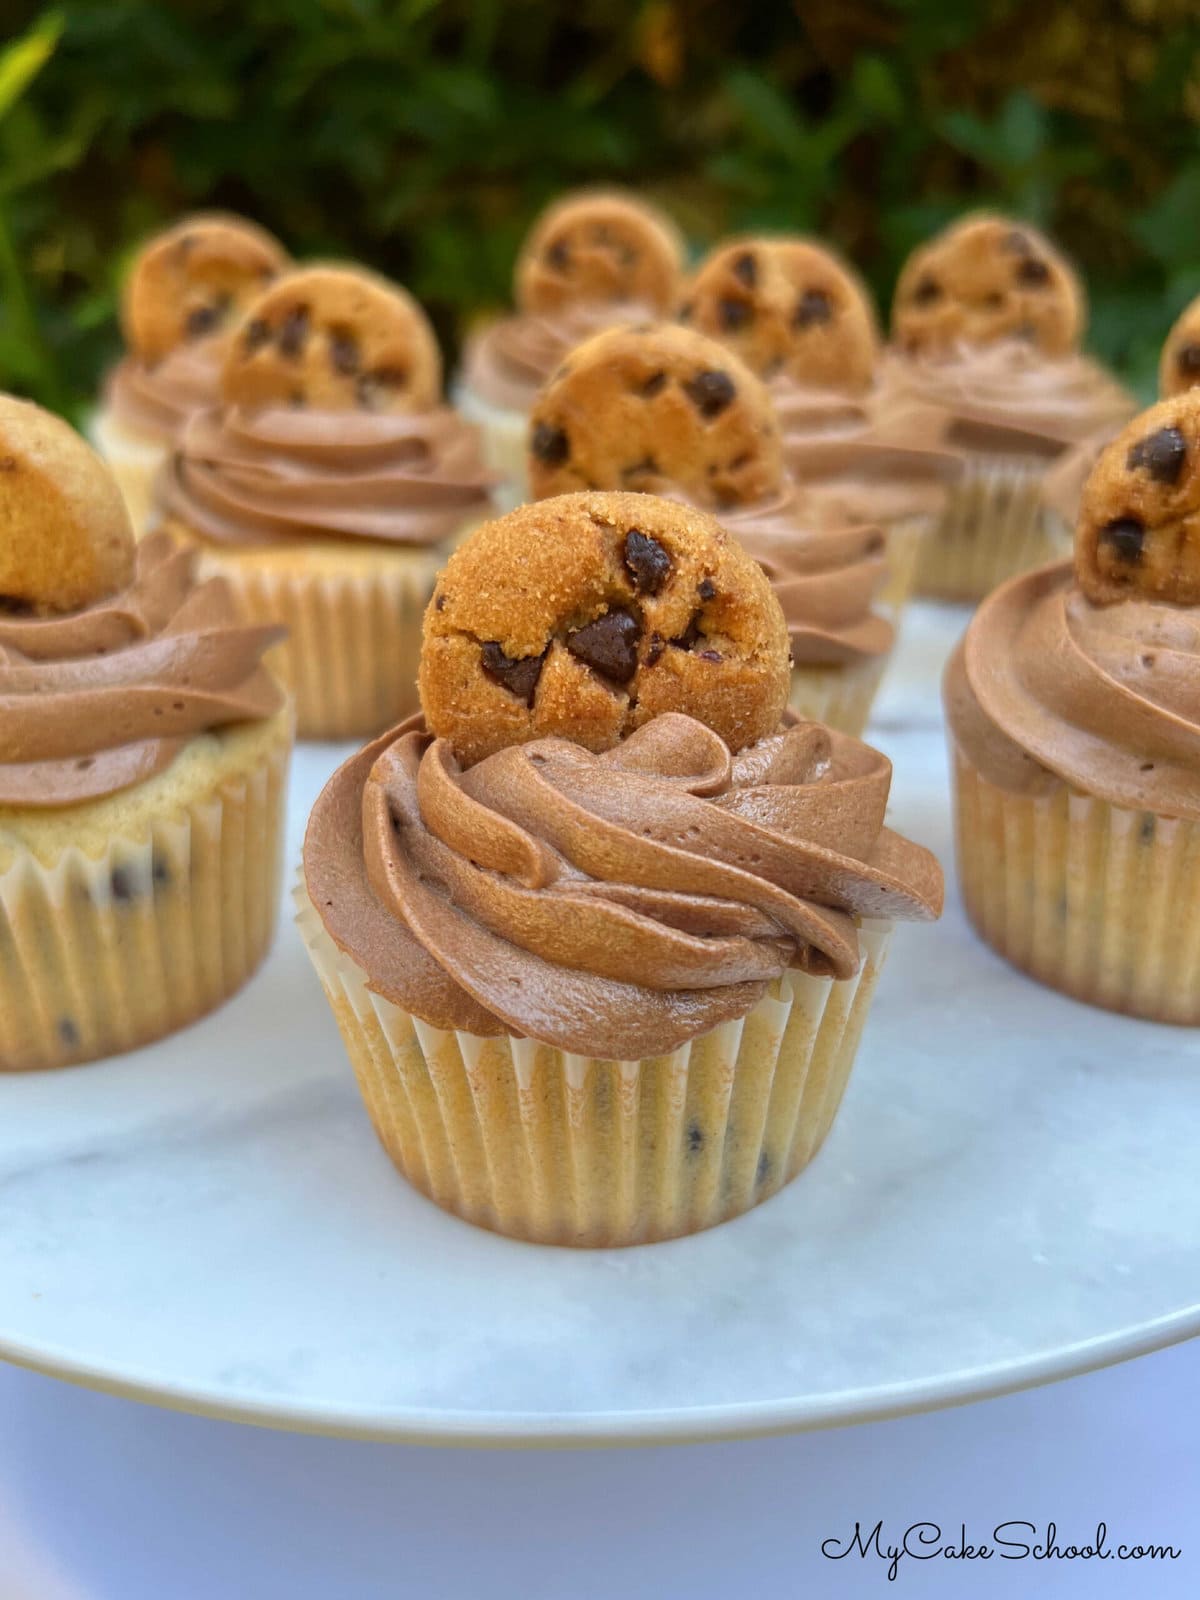 Chocolate Chip Cupcakes, topped with chocolate frosting and mini chocolate chip cookies.